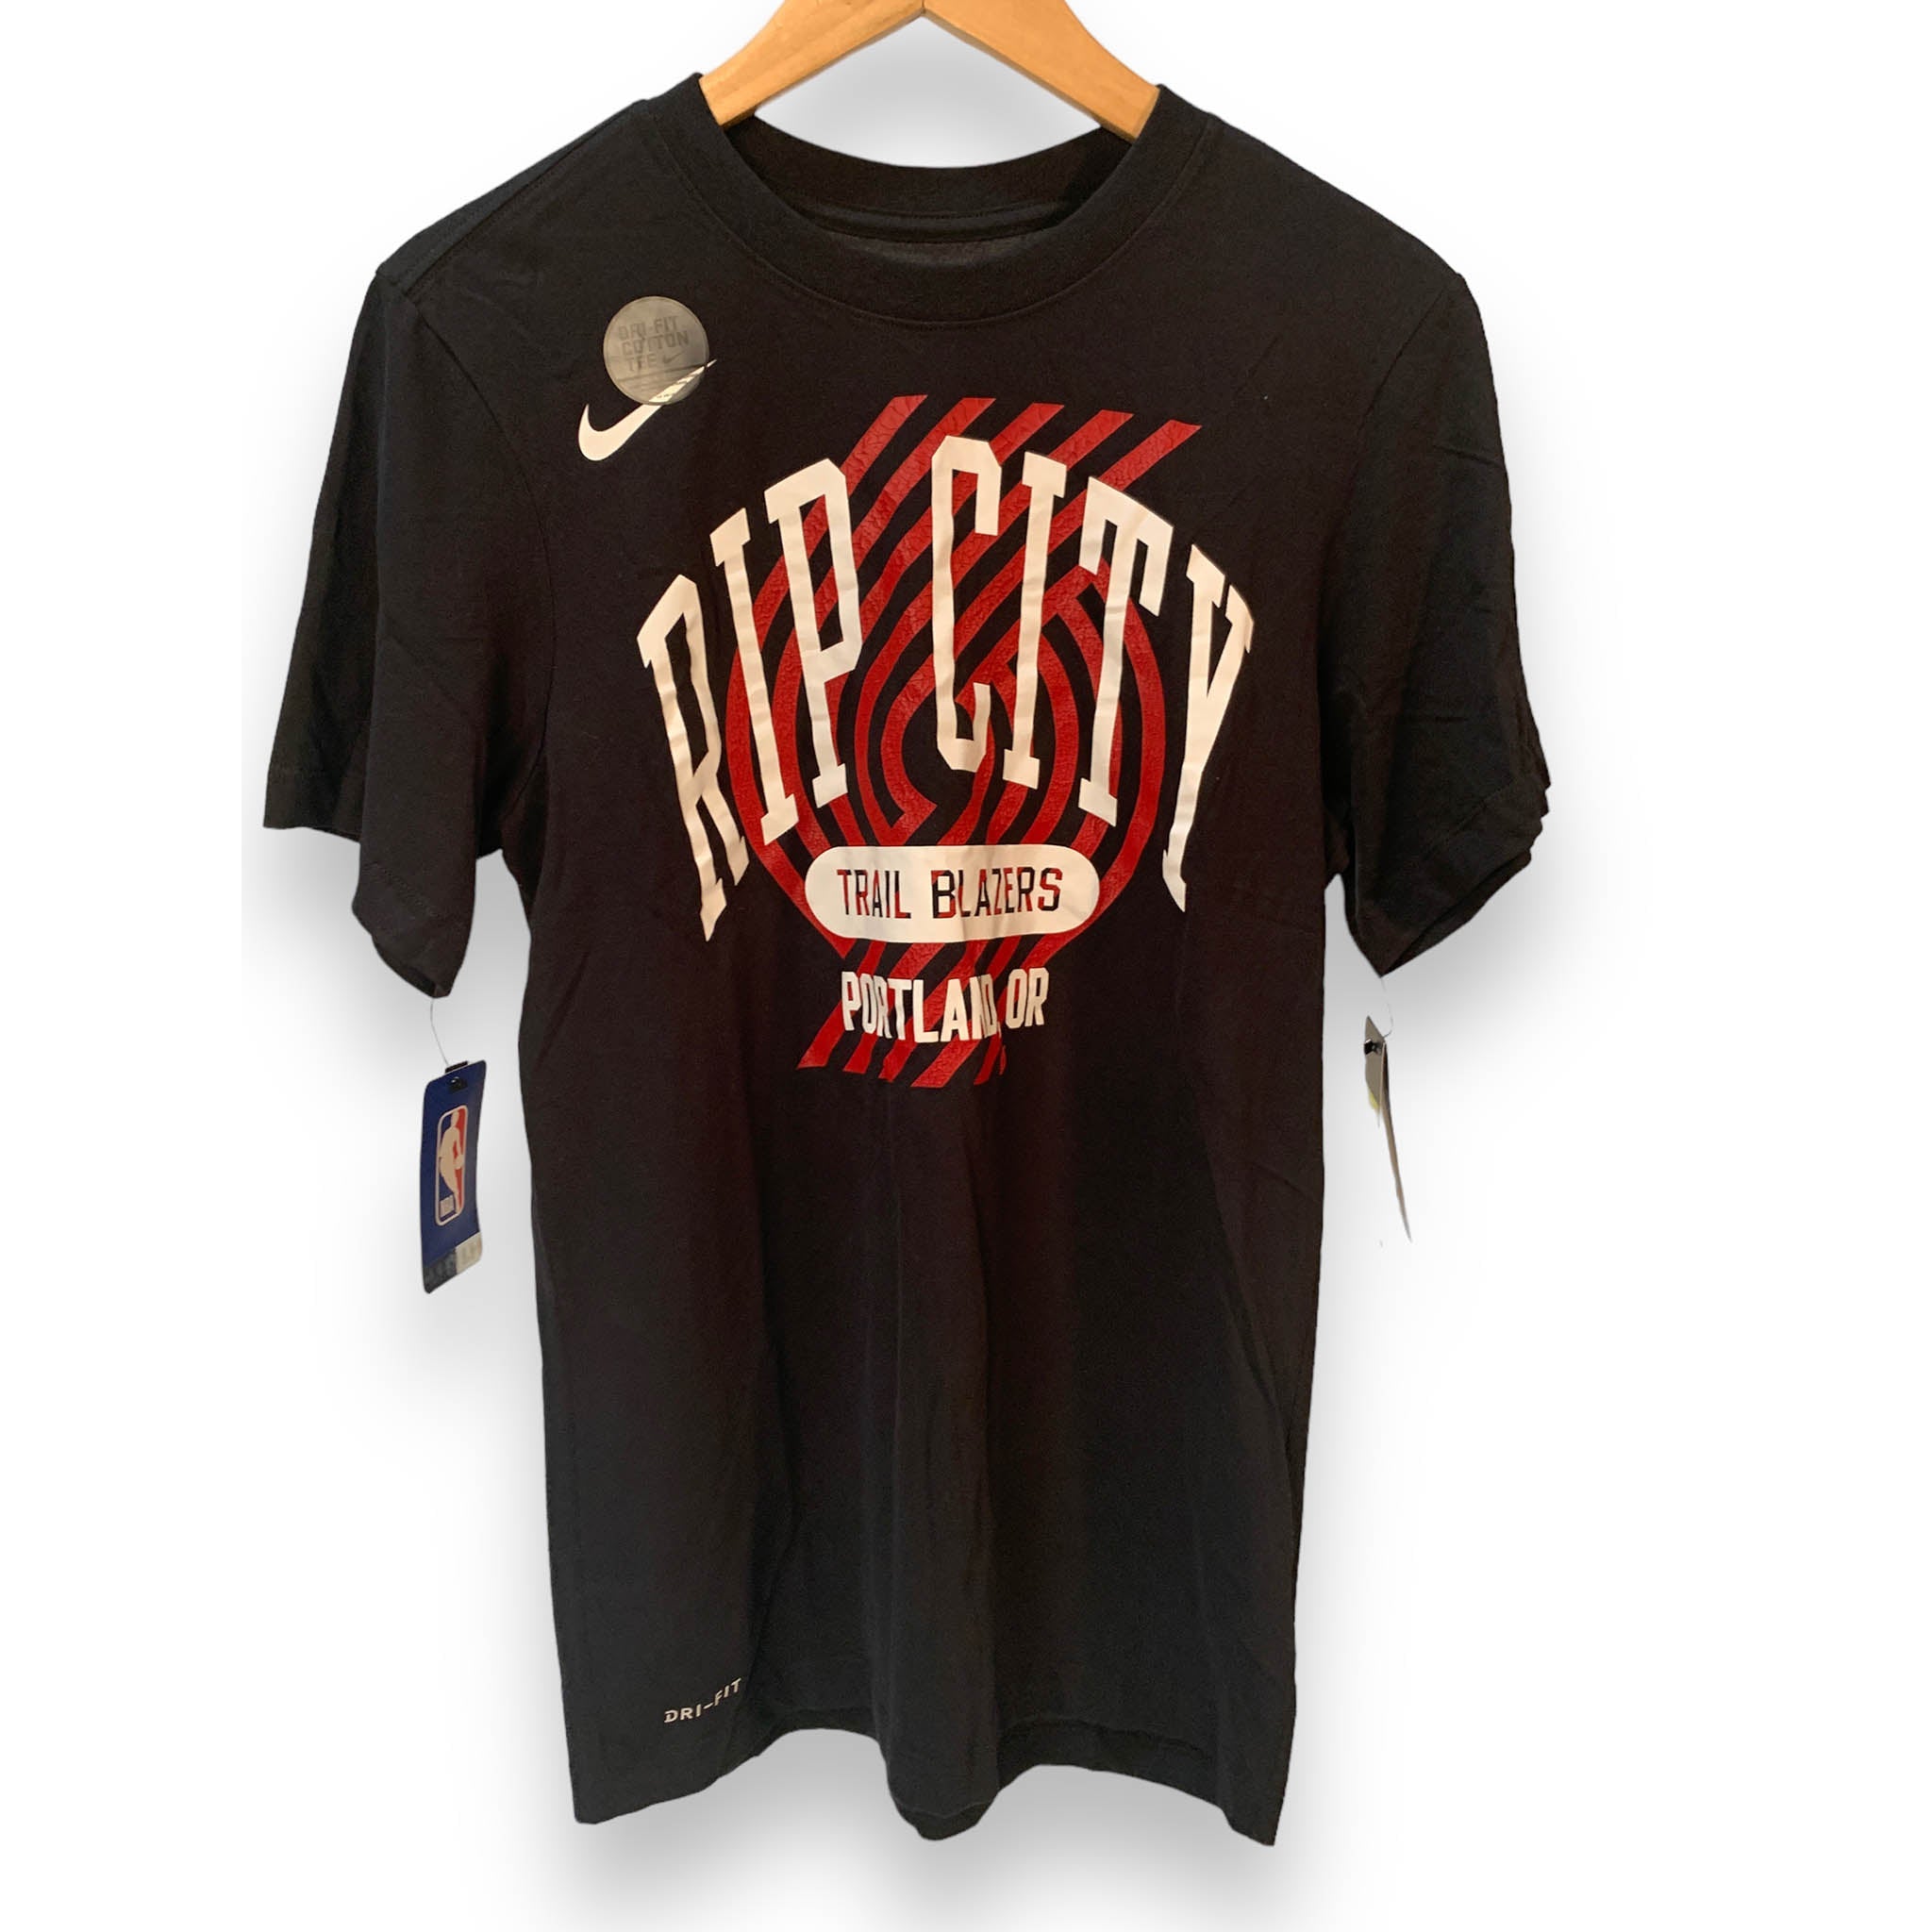 rip city products for sale